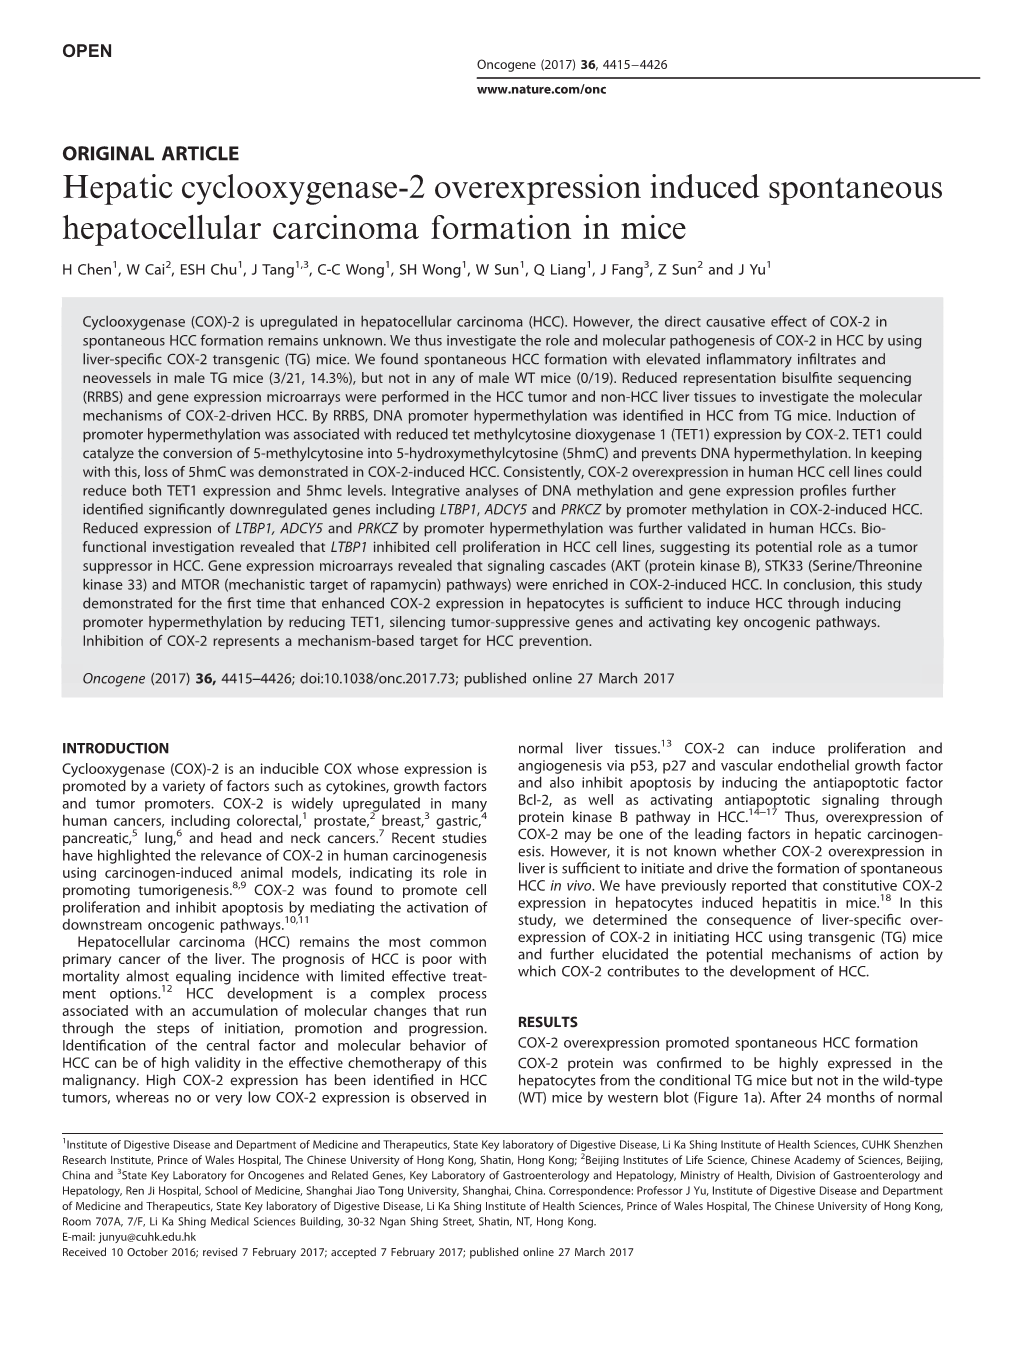 Hepatic Cyclooxygenase-2 Overexpression Induced Spontaneous Hepatocellular Carcinoma Formation in Mice